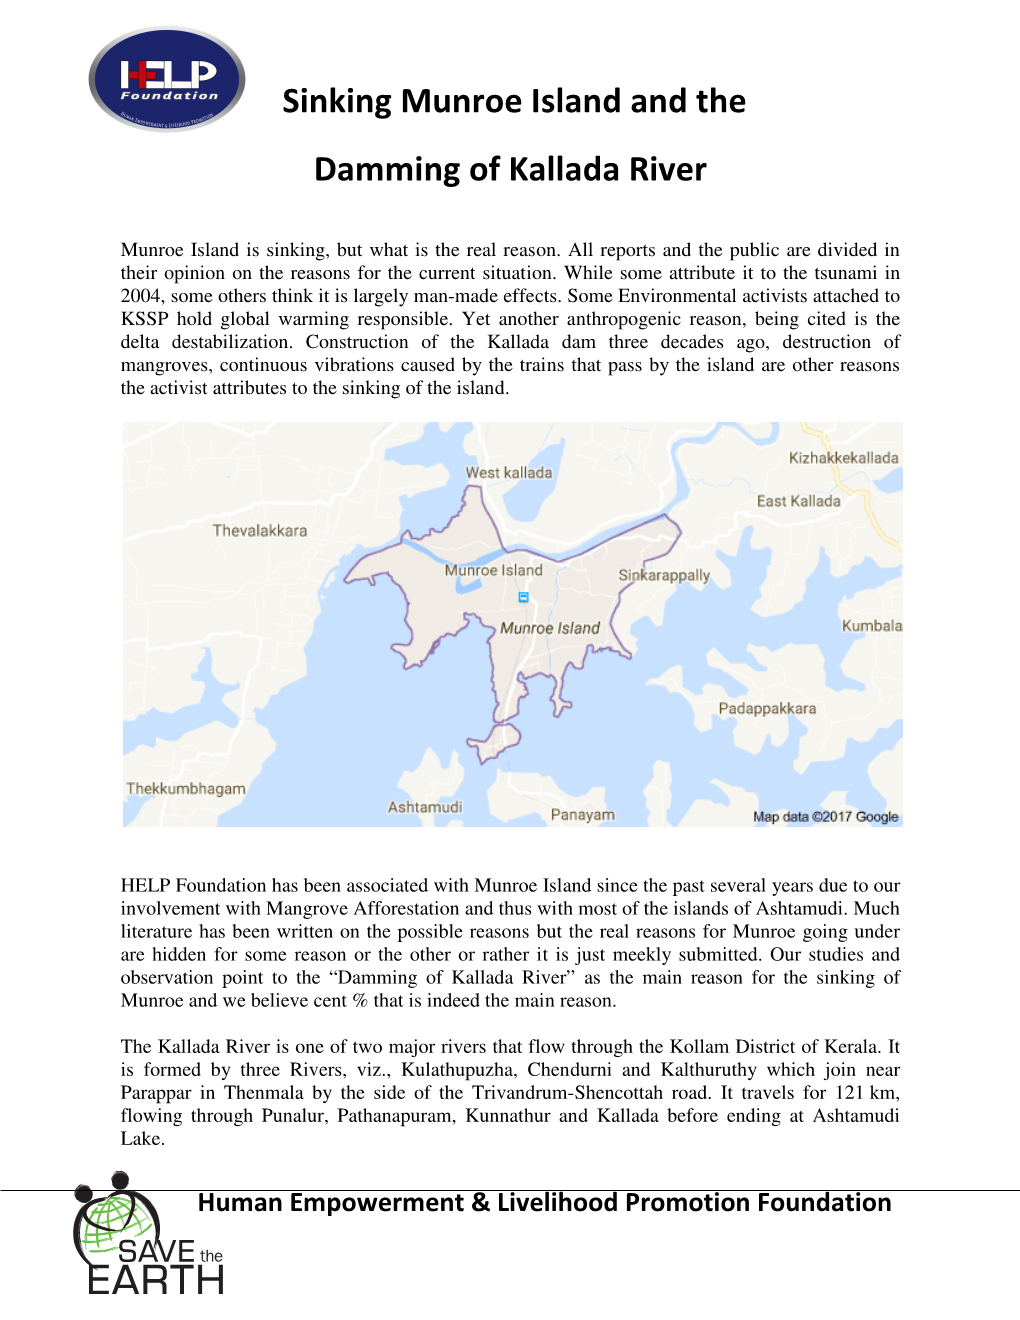 Sinking Munroe Island and the Damming of Kallada River